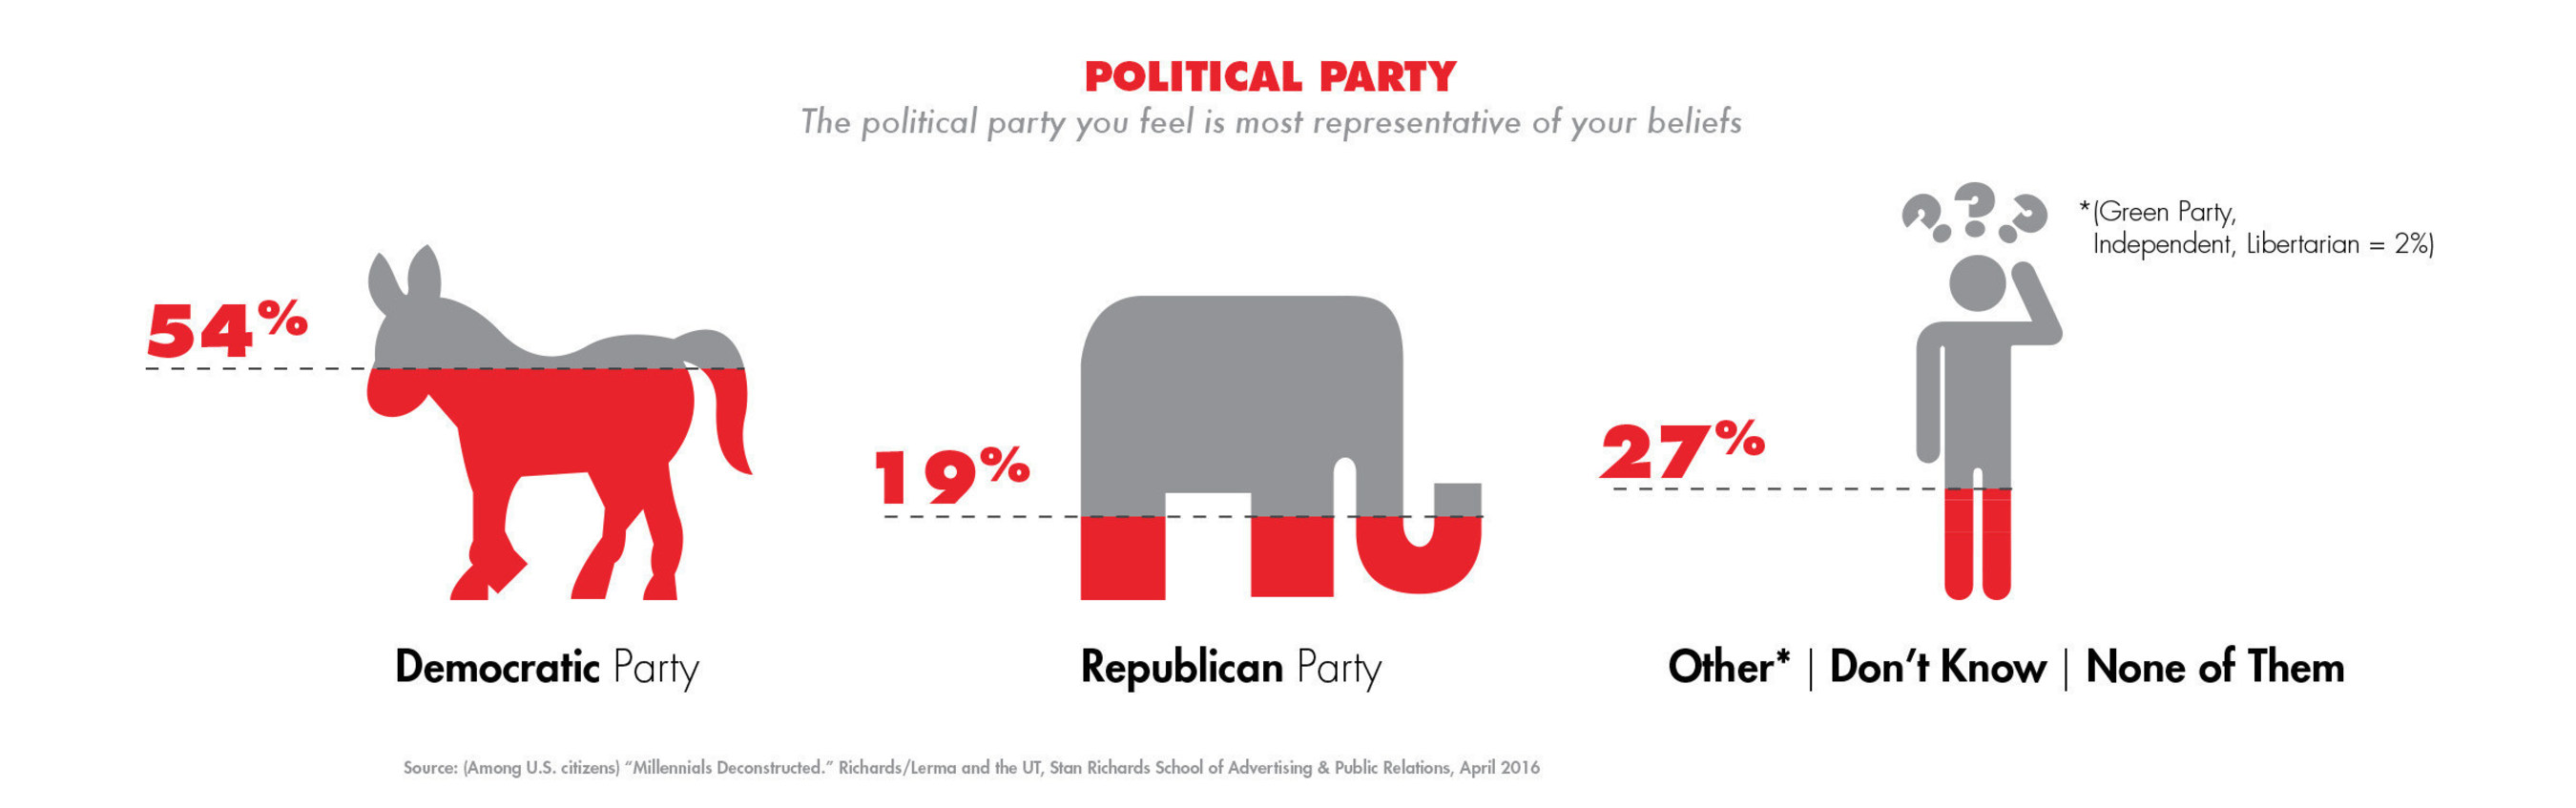 The political party you feel is most representative of your beliefs